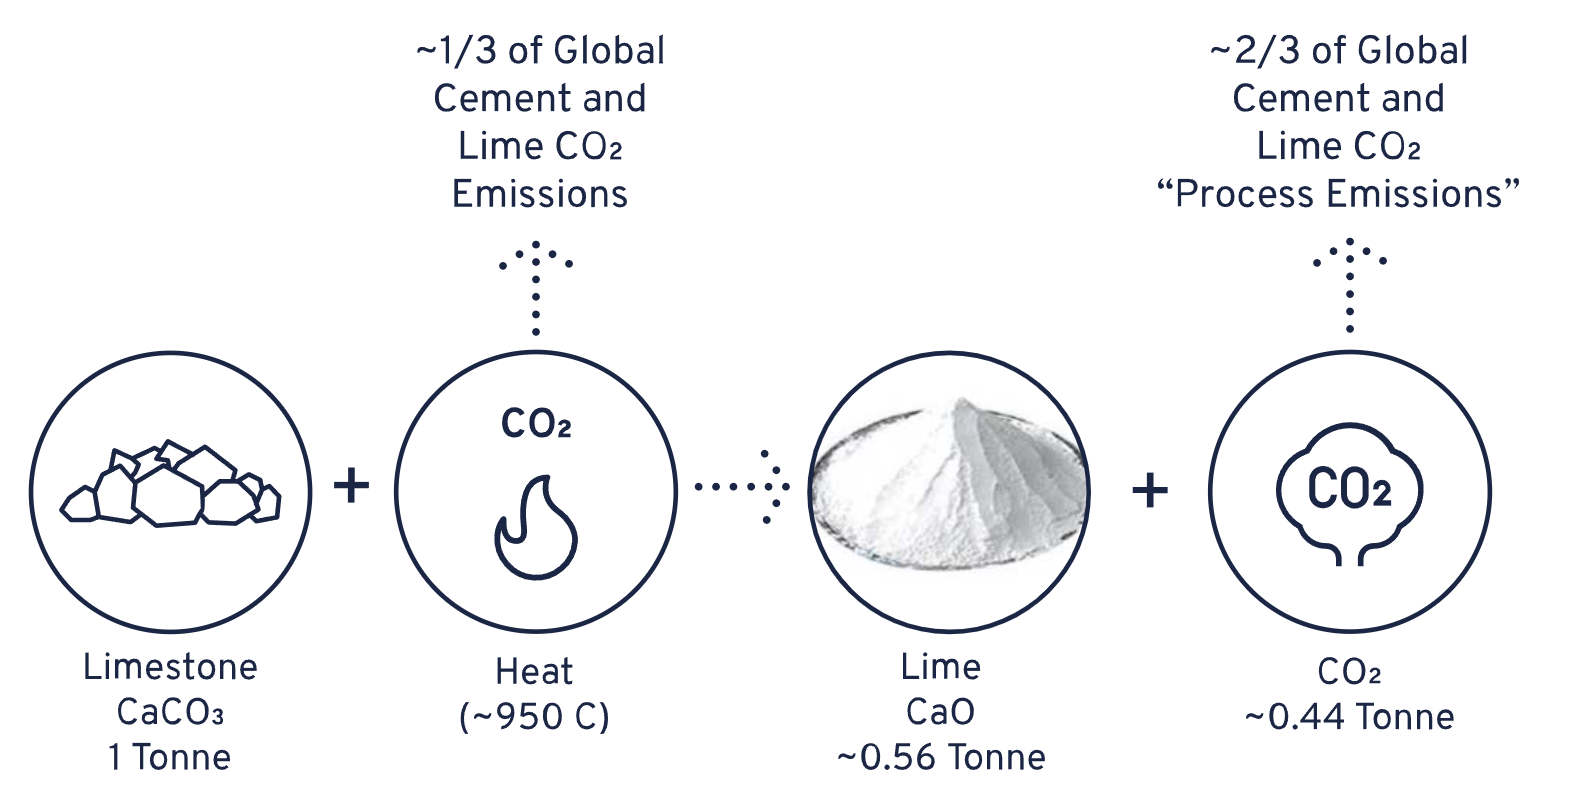 (Source: Calix Limited) An infographic demonstrating CO2 output of lime manufacture